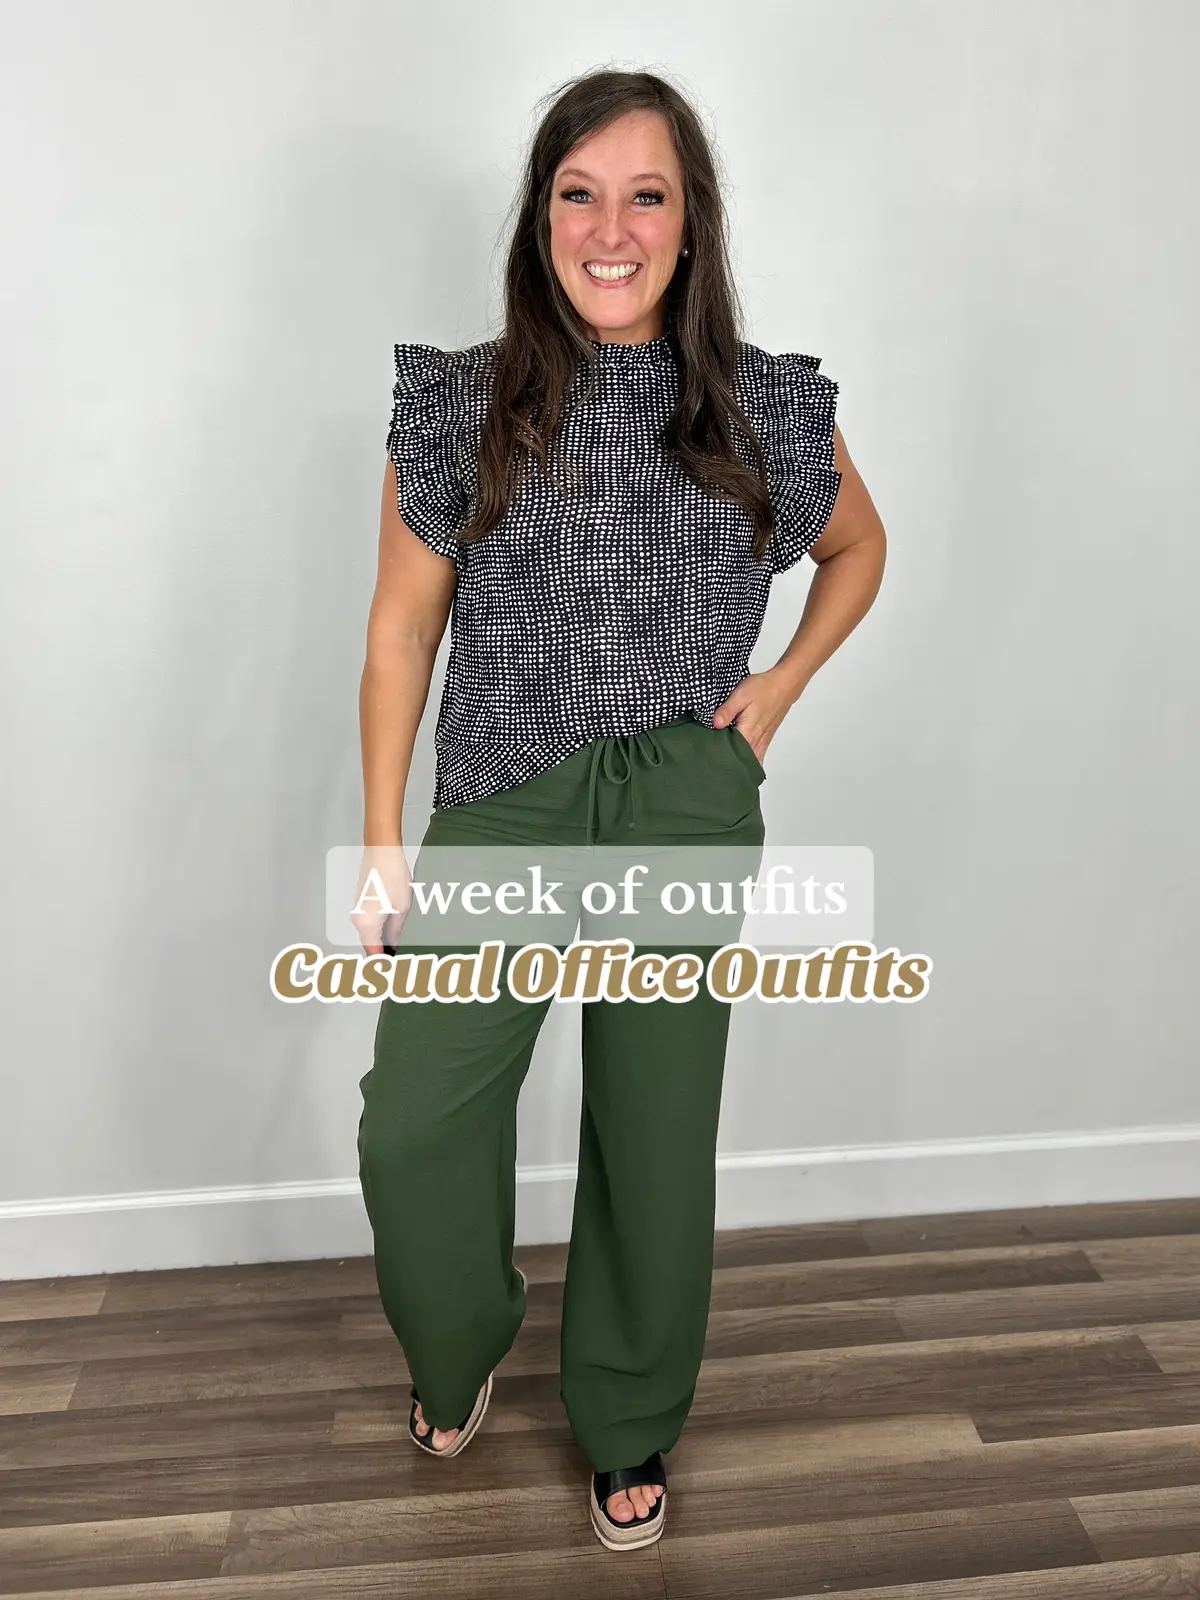 A full week of Casual Office Outfits. All outfits are at olivepoppie dot com 💅 #fyp #foryoupage #outfitinspo #workwear #workwearstyle #workwearinspo #casualofficeoutfit #casualofficefashion #casualworkwear #workwearfashion 